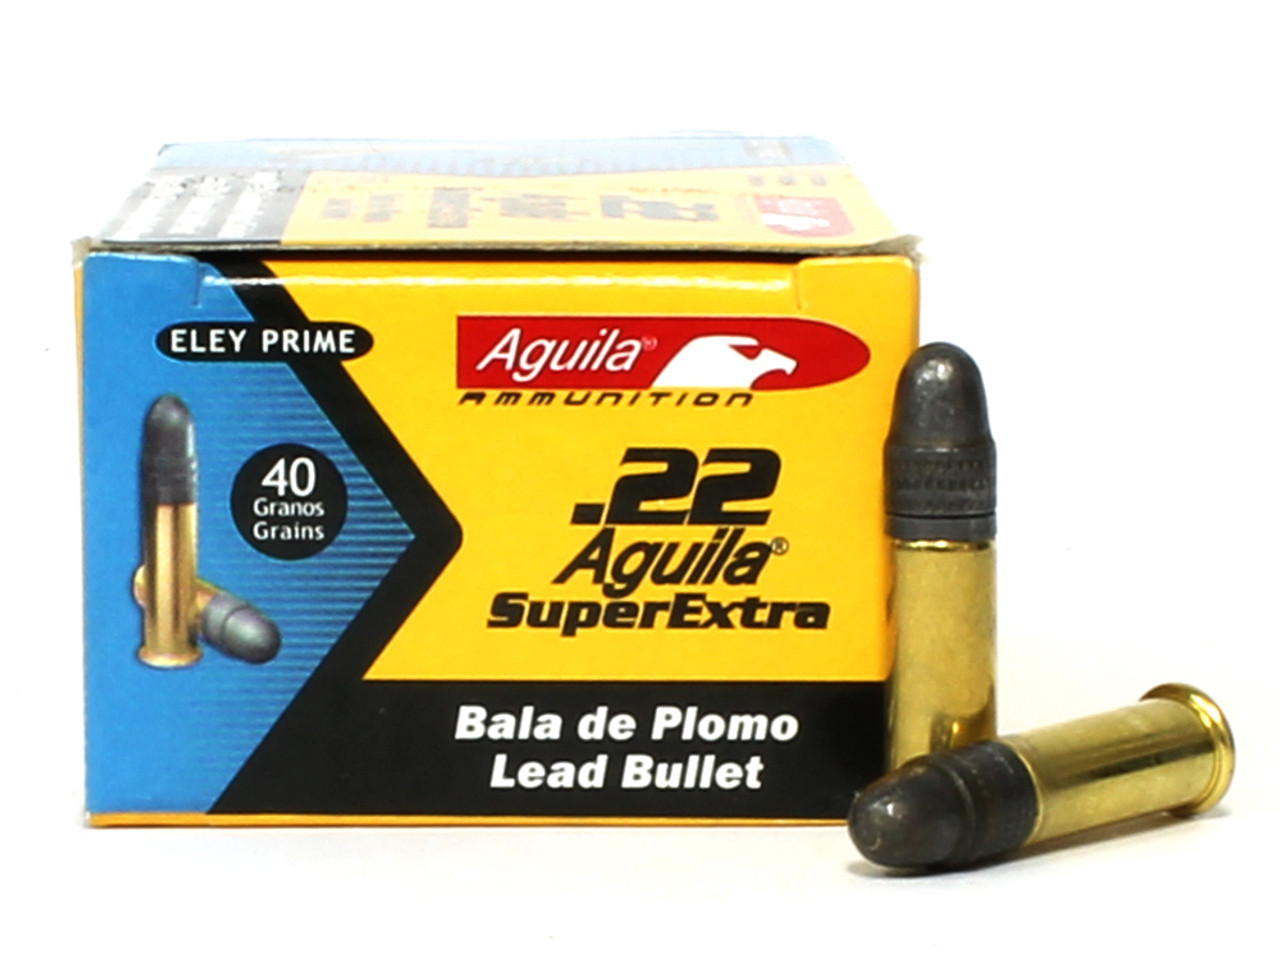 subsonic 22lr ammo for sale